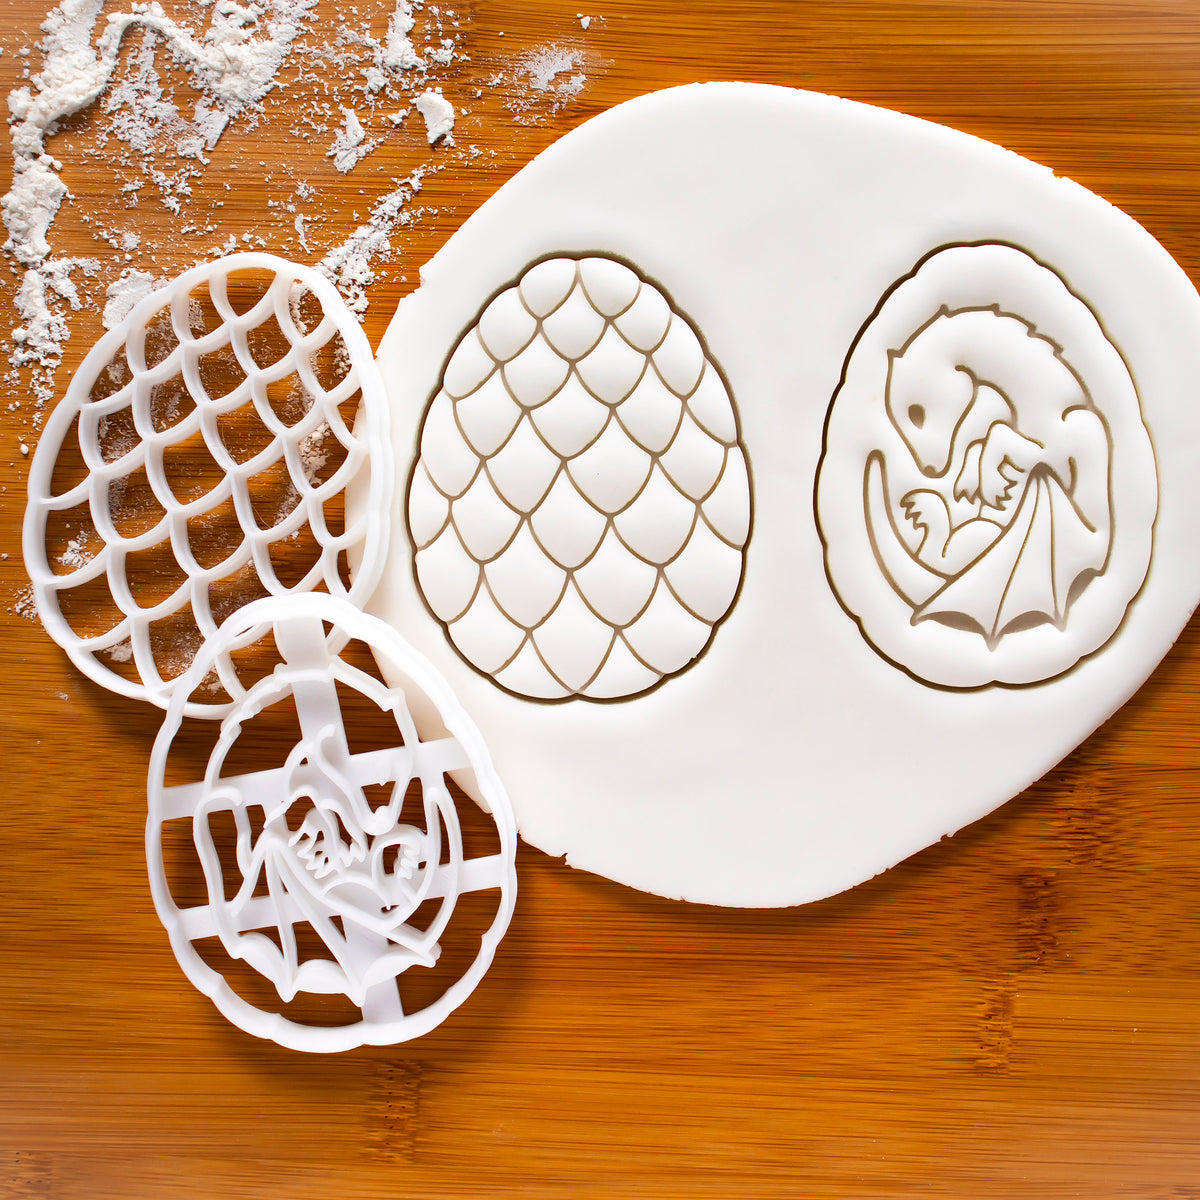 Dragon Egg and Dragon Baby Cookie Cutters